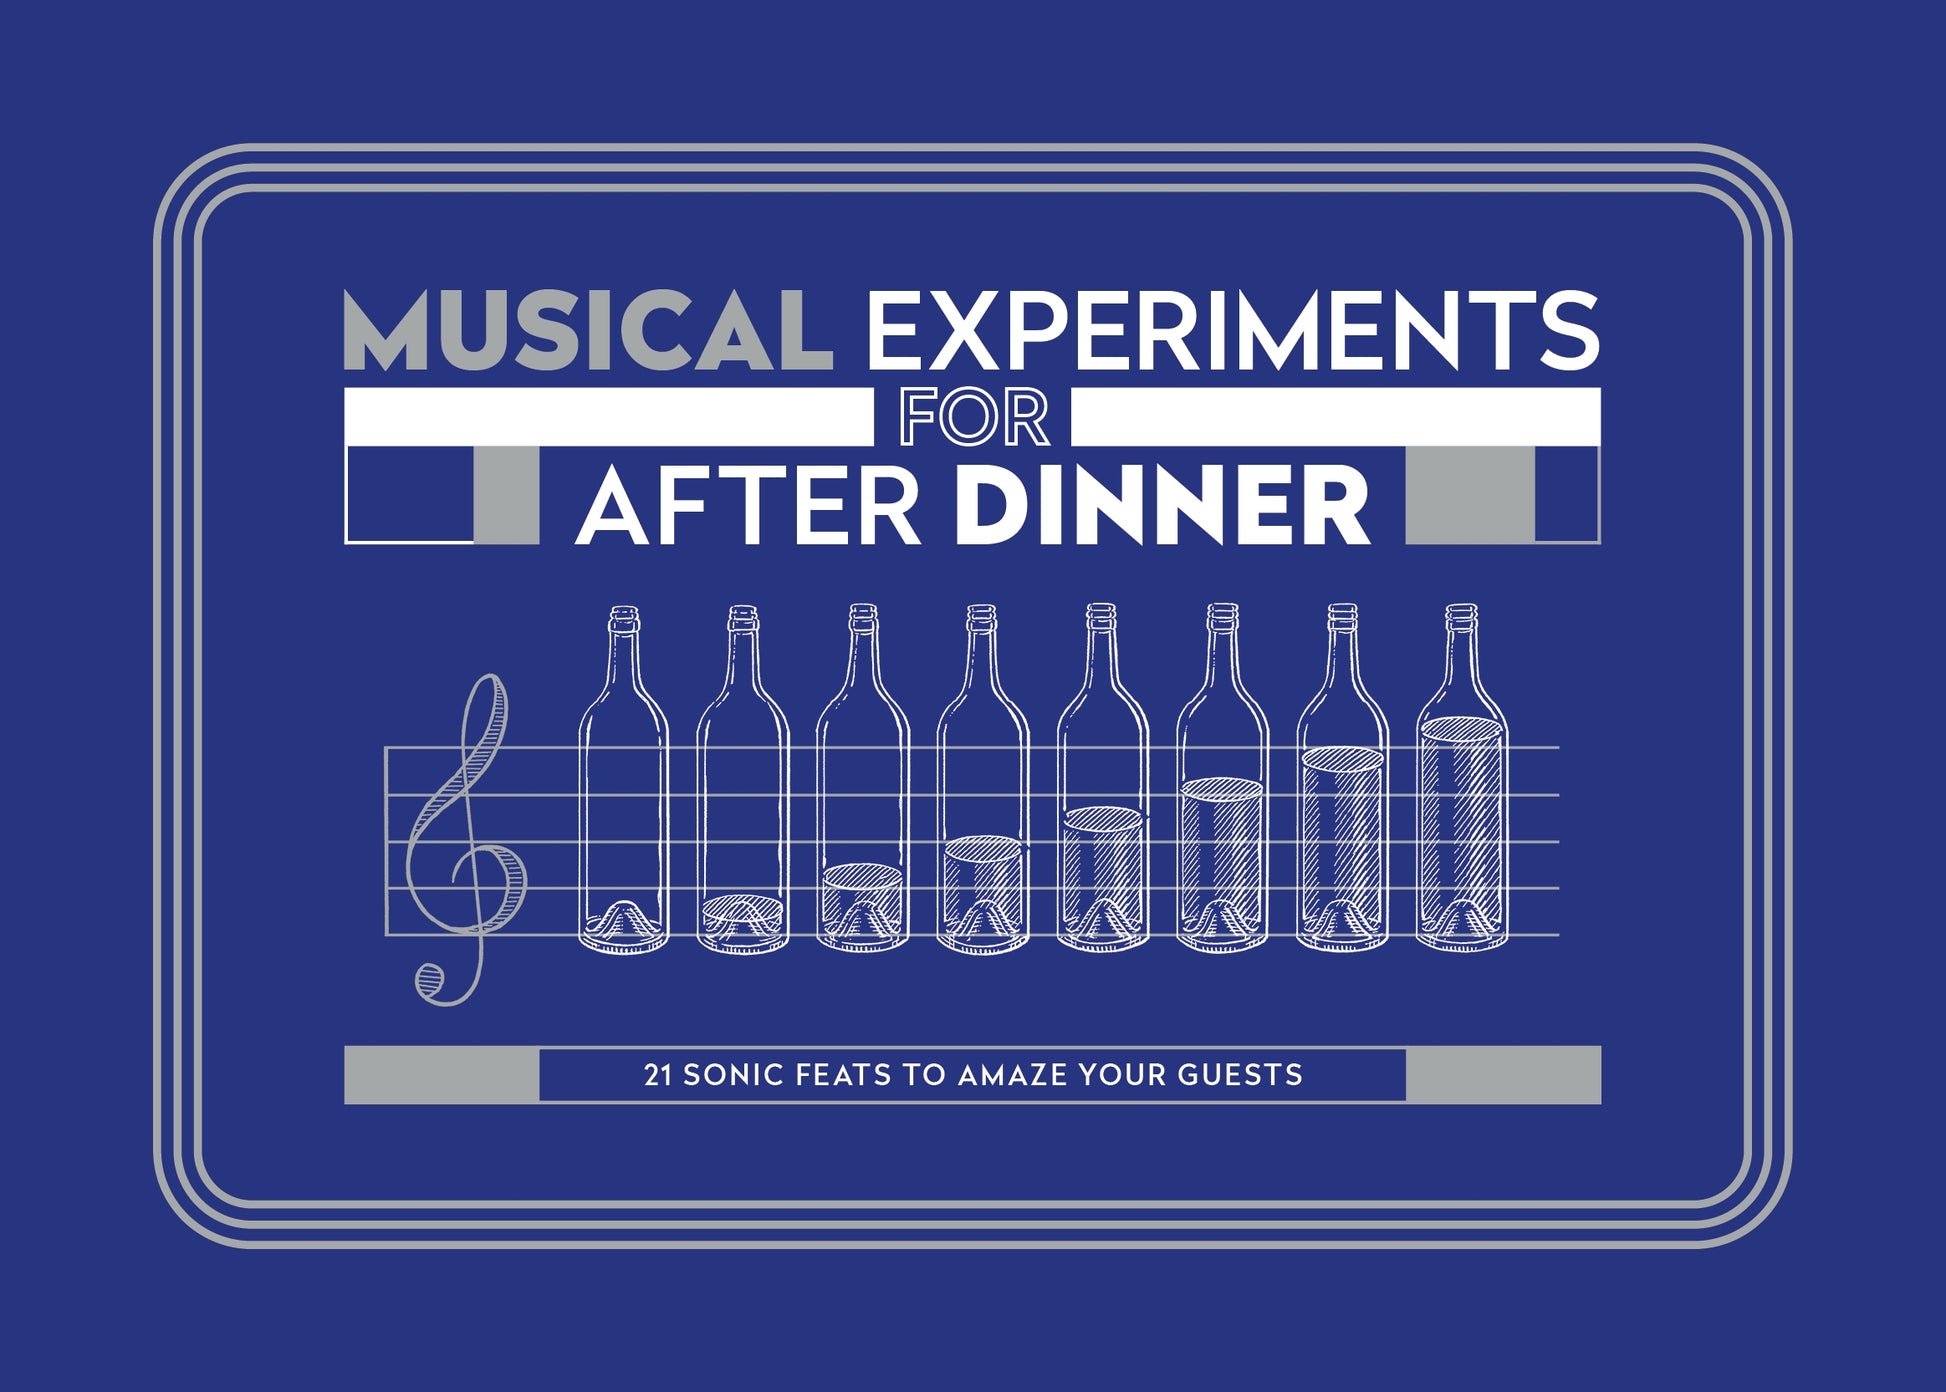 Musical Experiments for After Dinner by Angus Hyland, Tom Parkinson